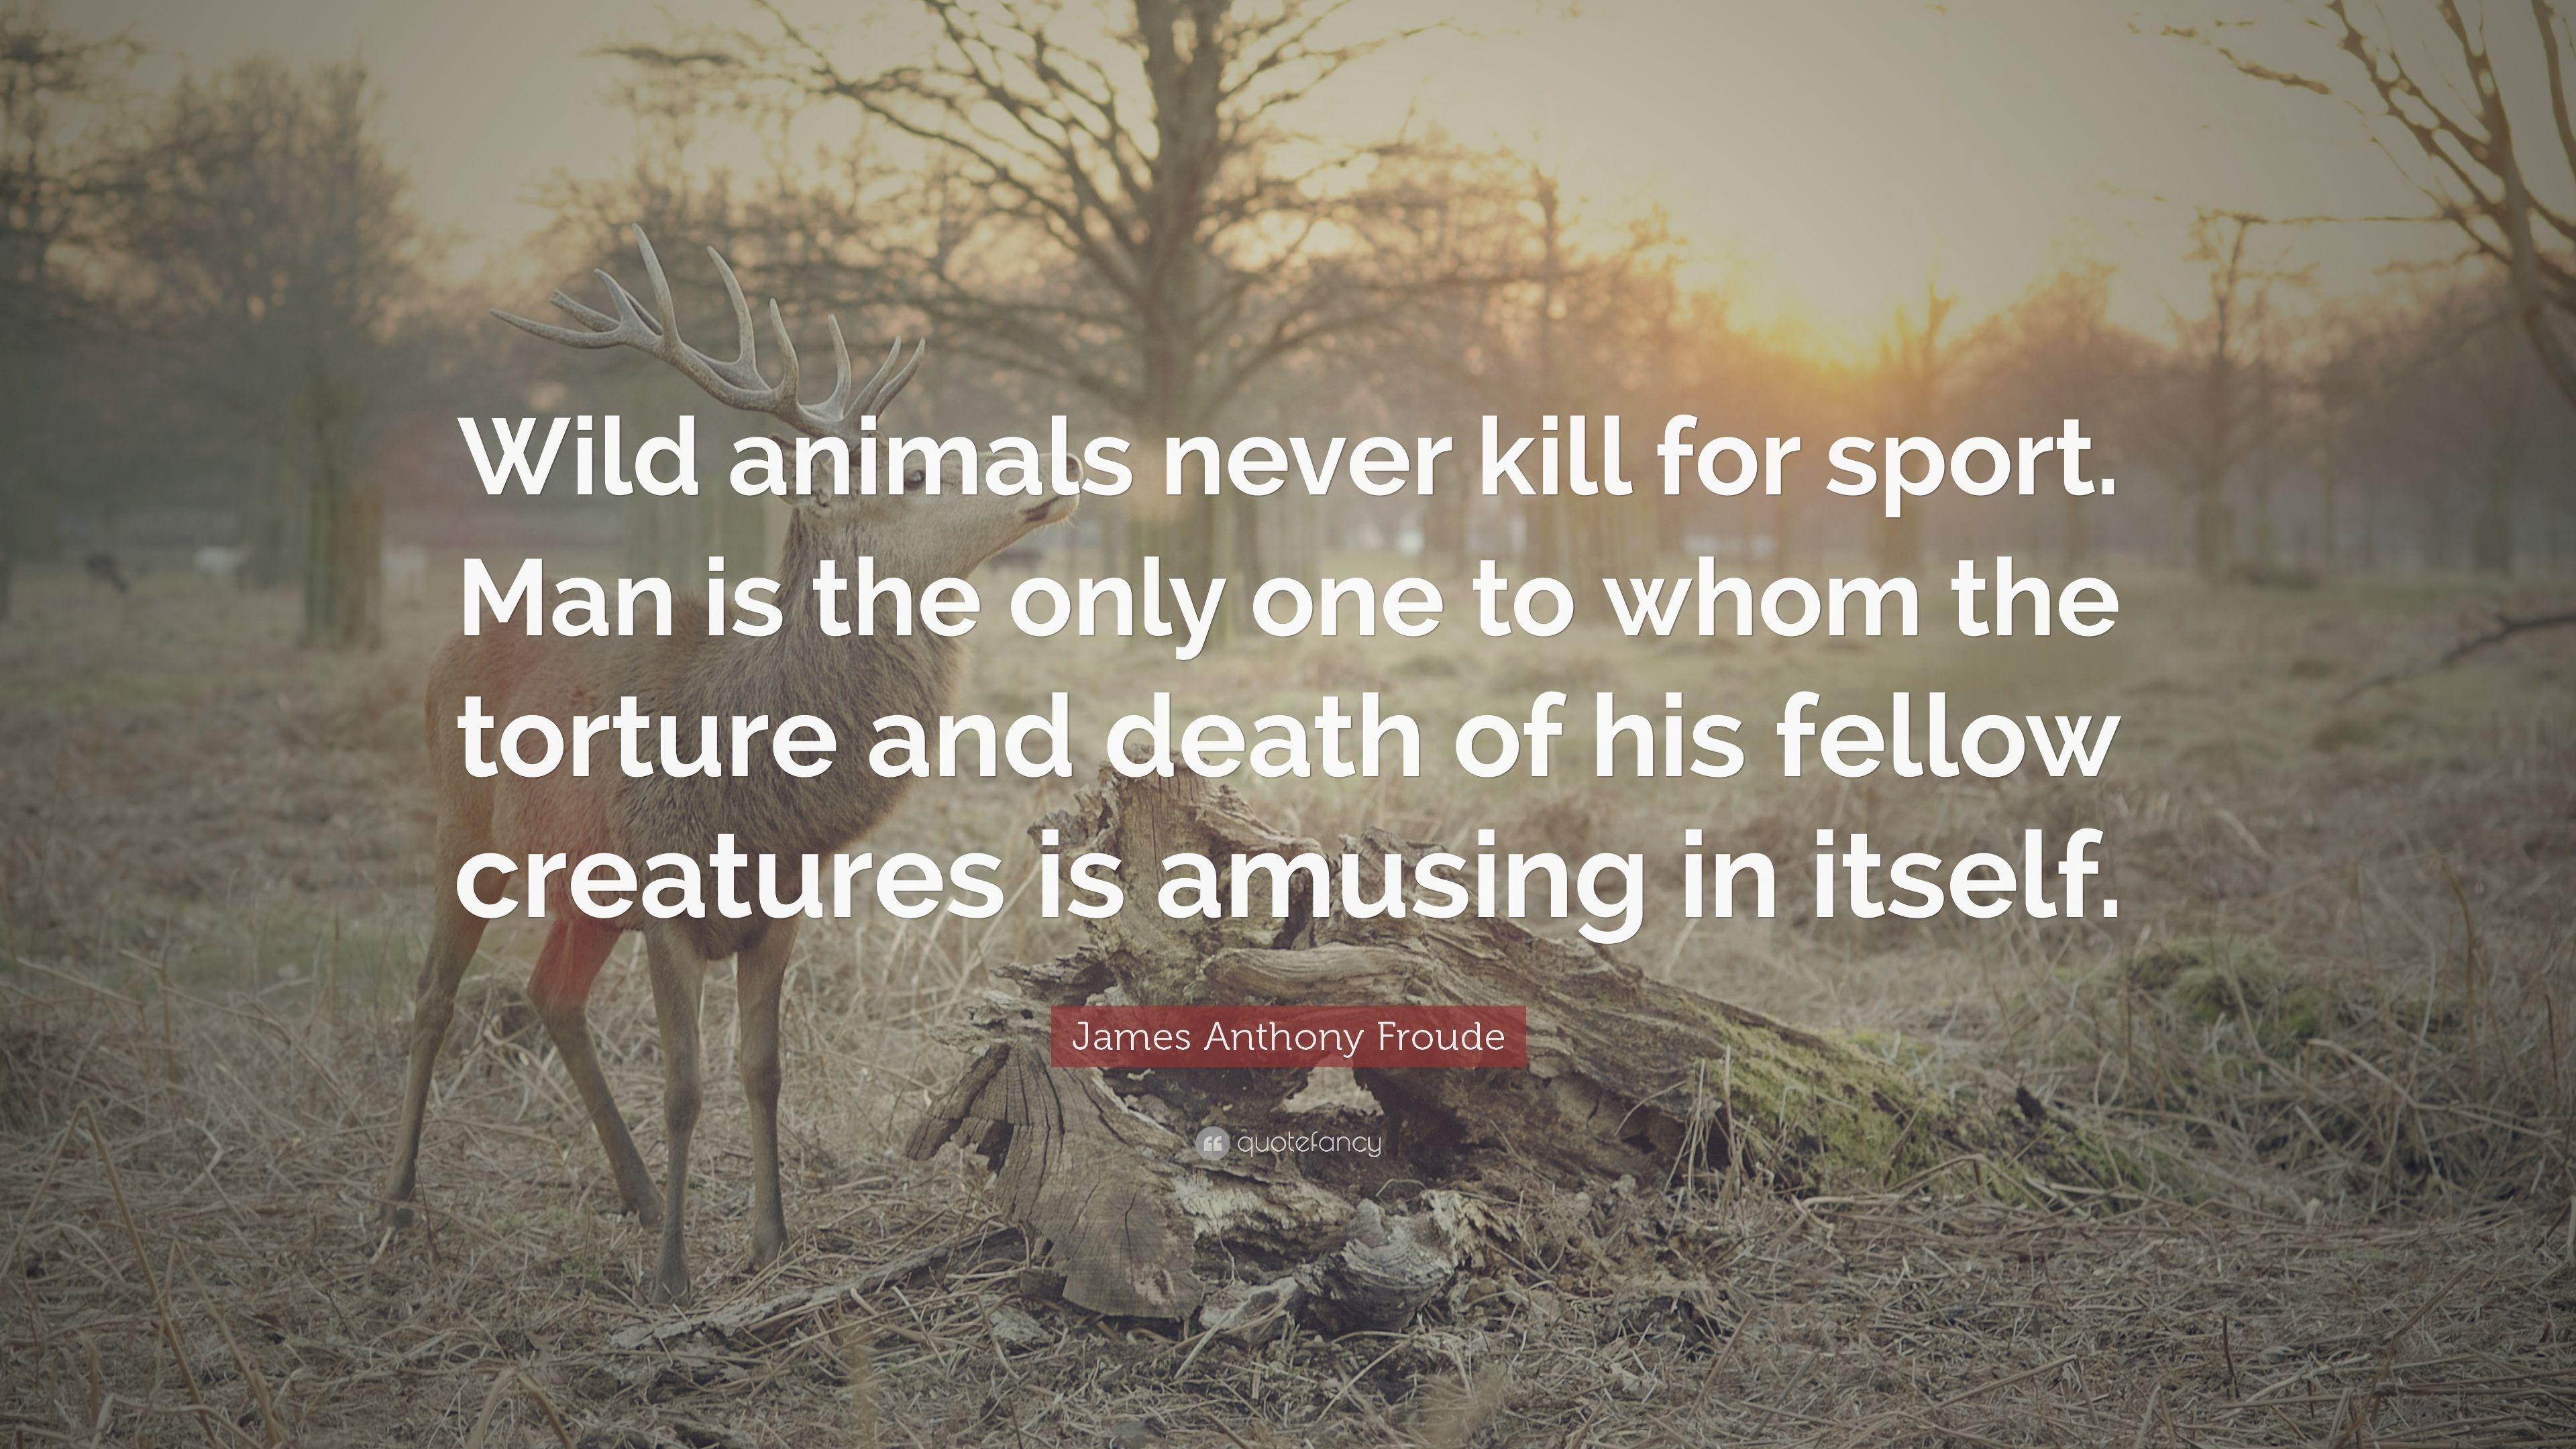 James Anthony Froude Quote: “Wild animals never kill for sport. Man